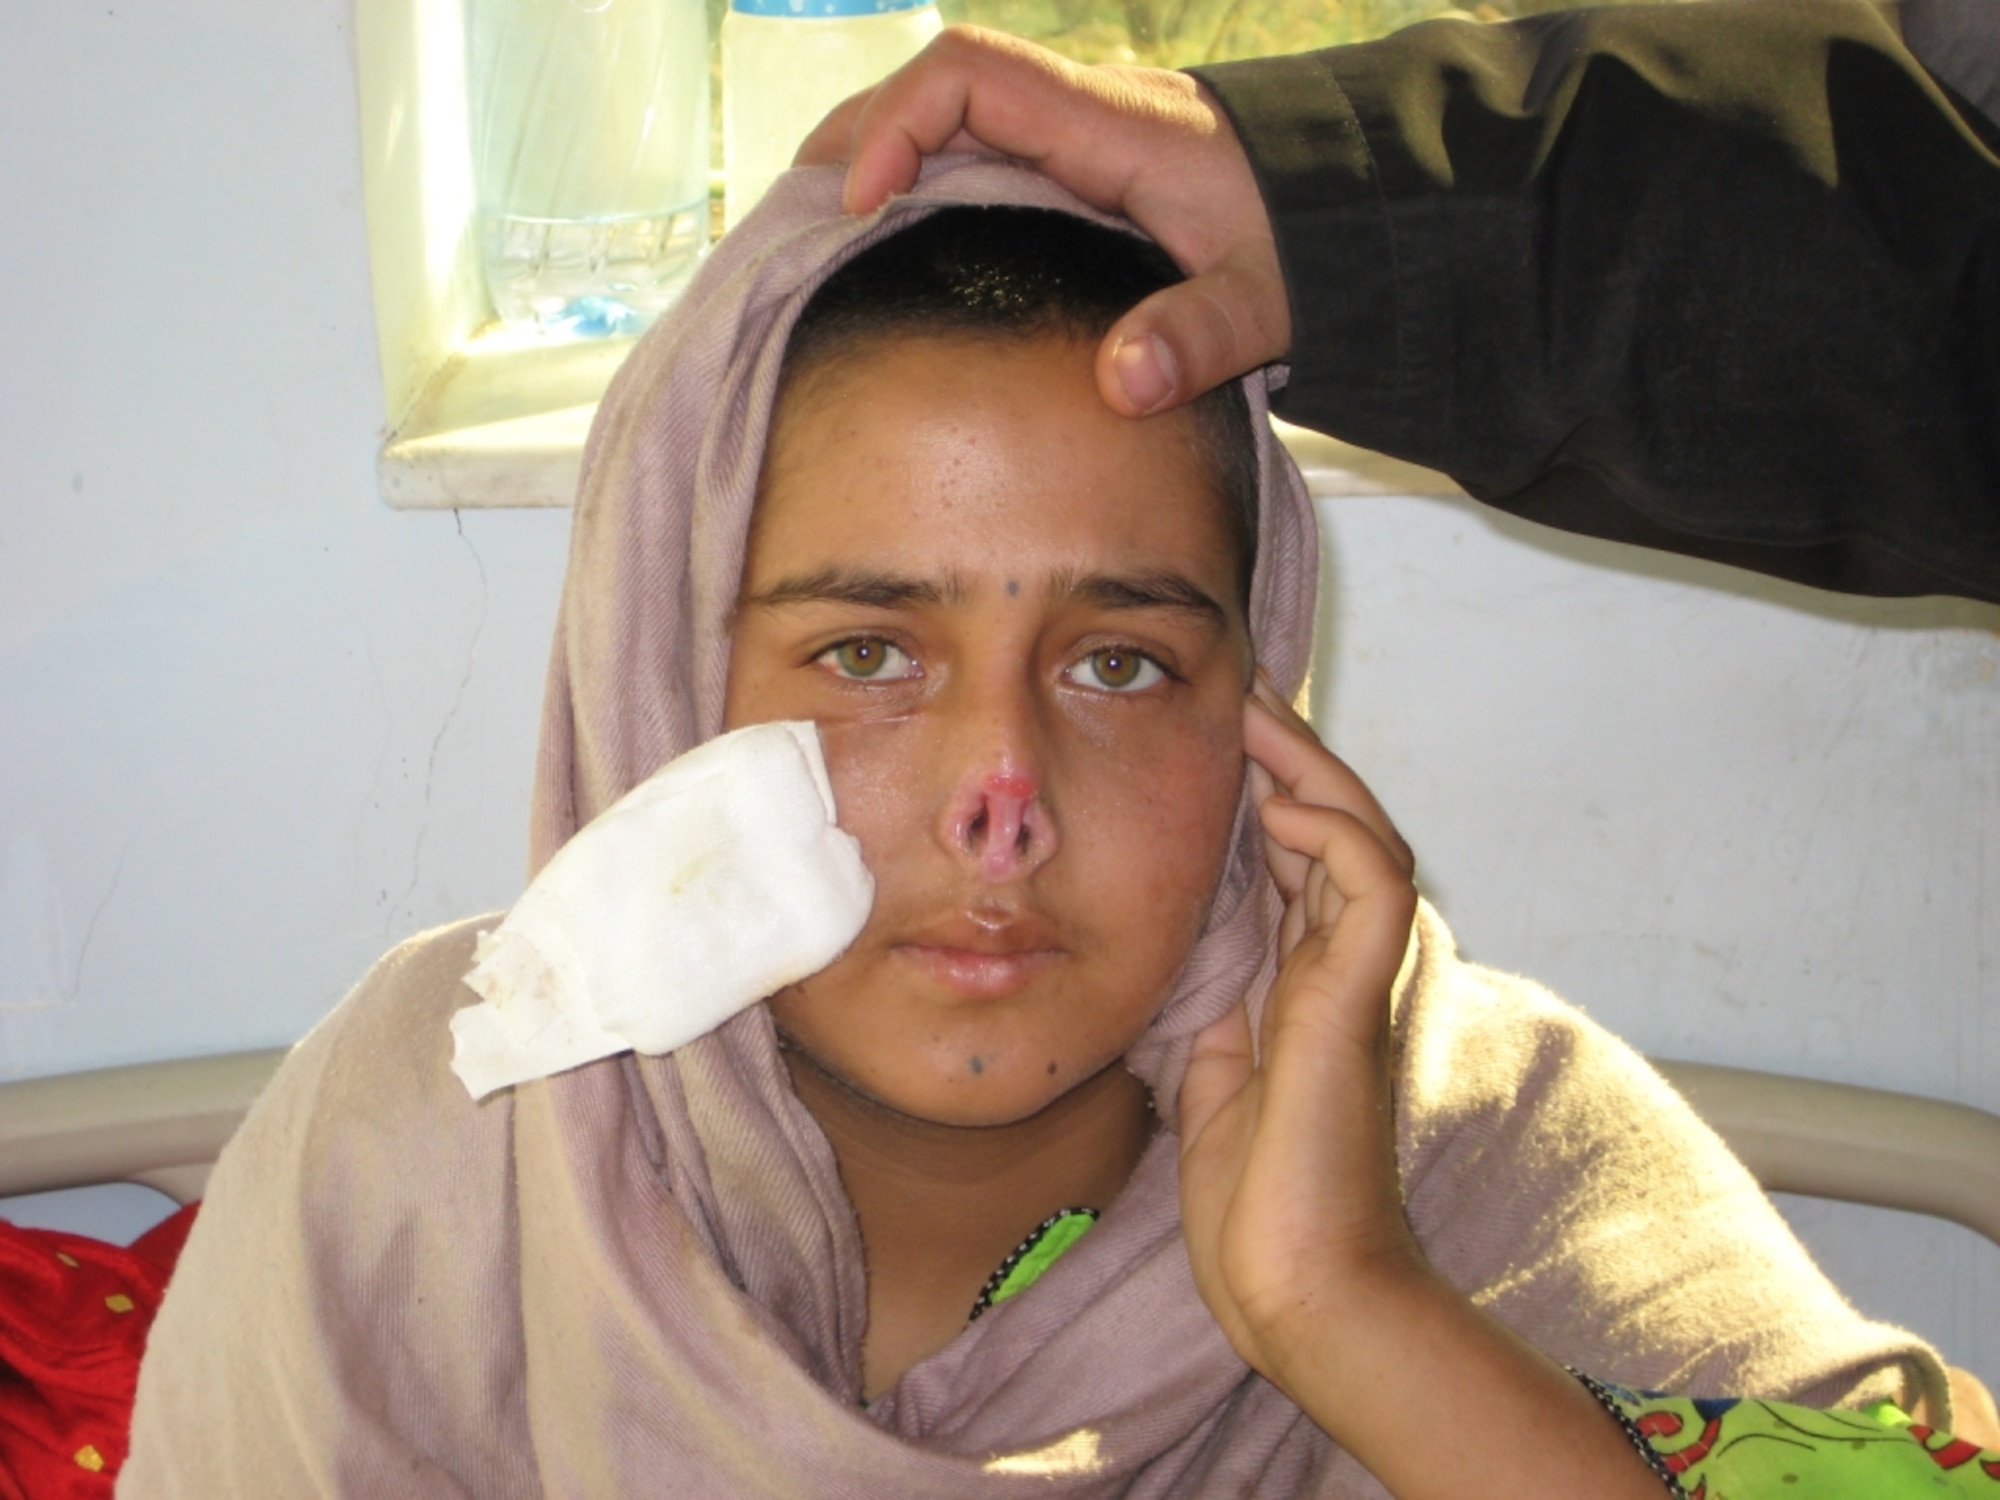 QALAT, Afghanistan – Nazia Hookum Darr, 16, was brutally attacked here by her 40-year-old husband of three months on Christmas day.  The man—who is still on the run from police—broke 16 of his wife’s teeth, shaved her head, cut off her nose and ears and poured scalding water on her hands and feet.  The young woman is set to receive plastic surgery in Kabul following close coordination between the Afghan government and Provincial Reconstruction Team Qalat, a joint U.S. Air Force and Army unit stationed here.  (Air Force photo by Lt. Col. Michael Gauron)